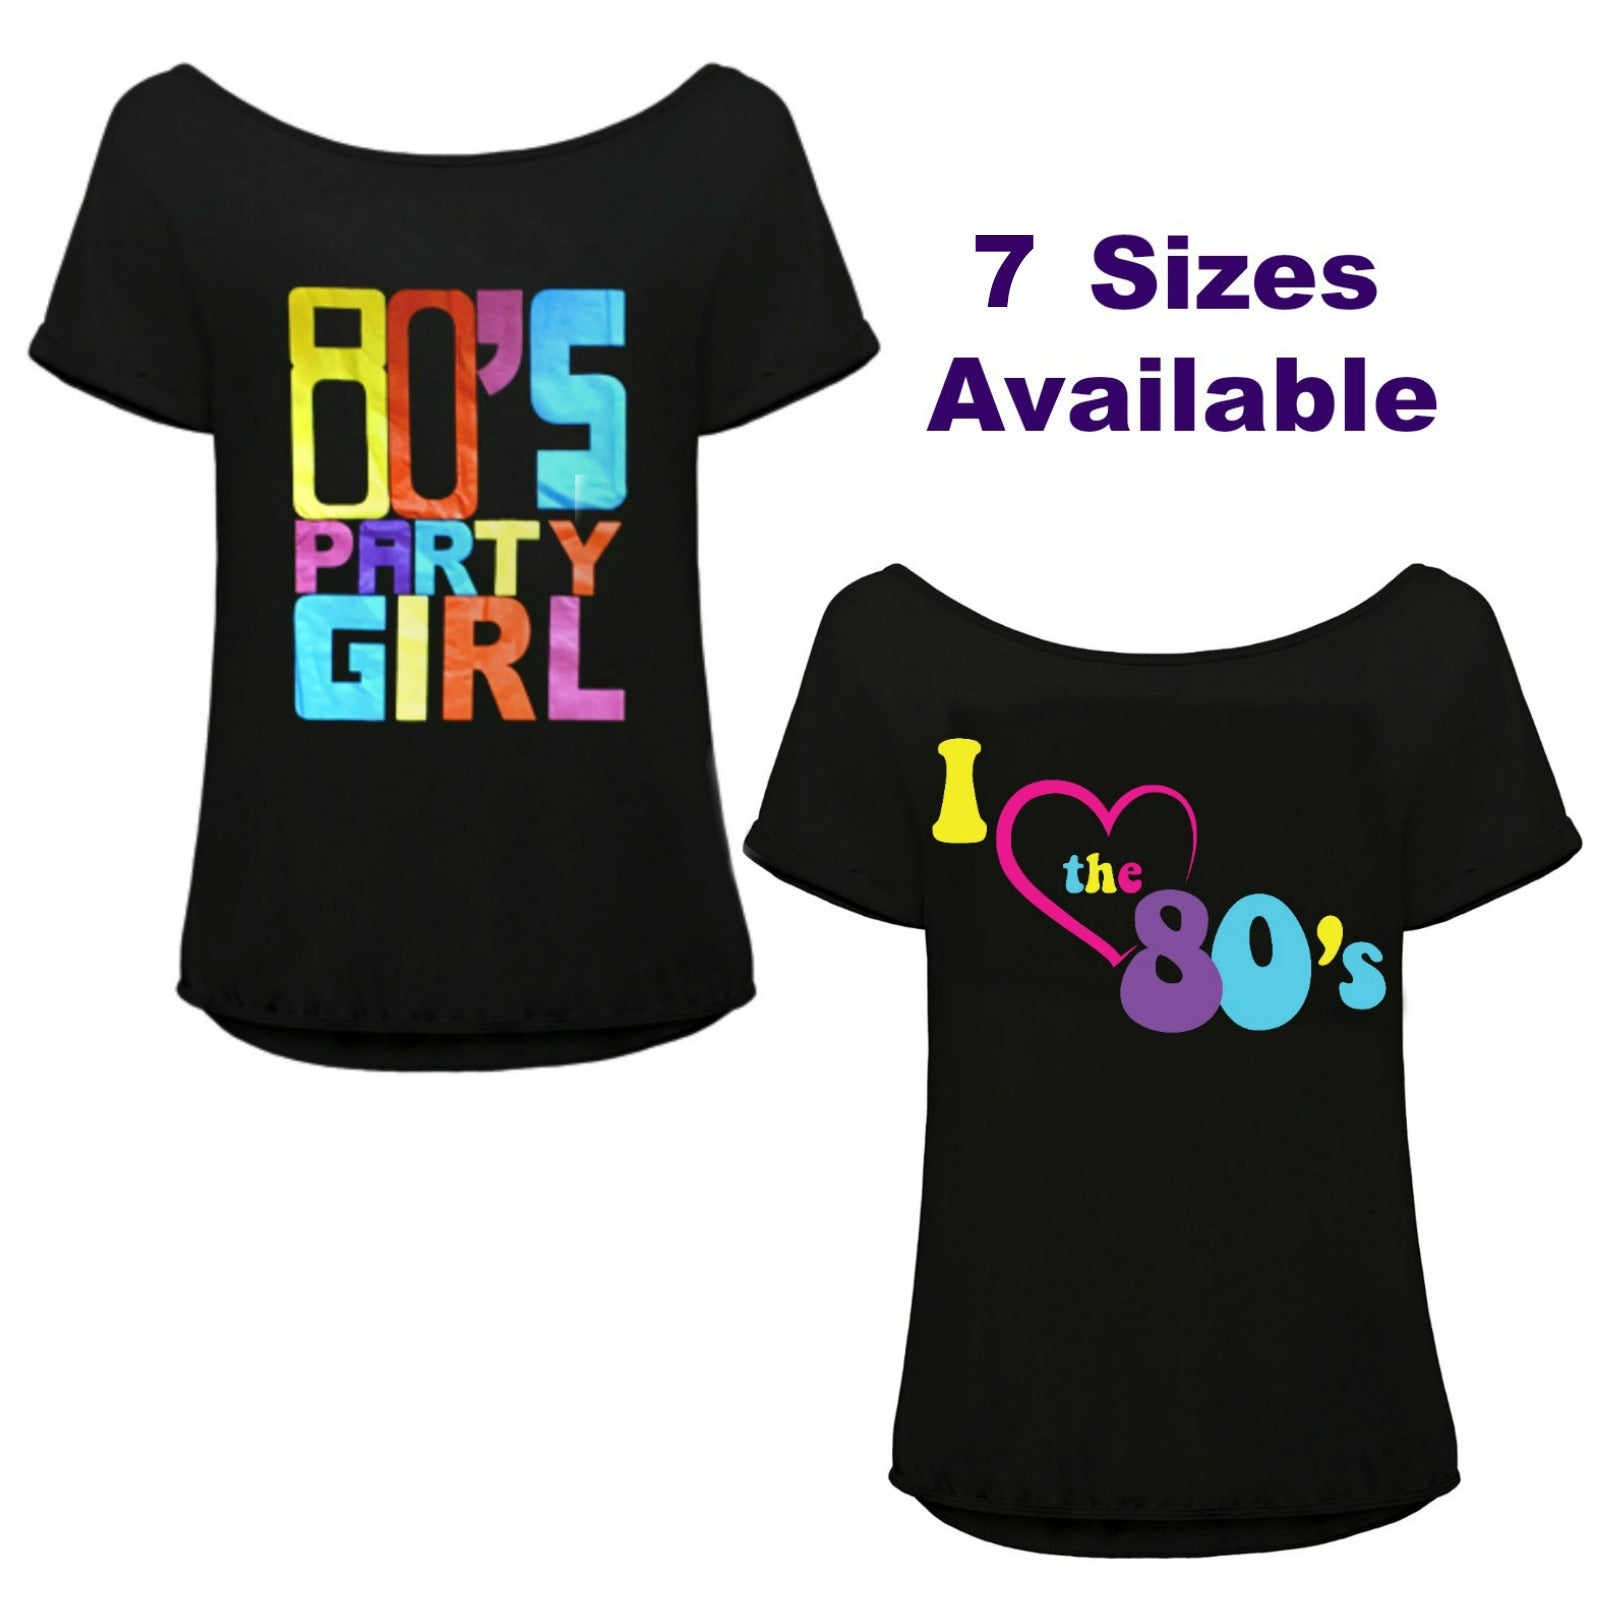 I Love the 80s Ladies Top Girl T-Shirt - Ideaz